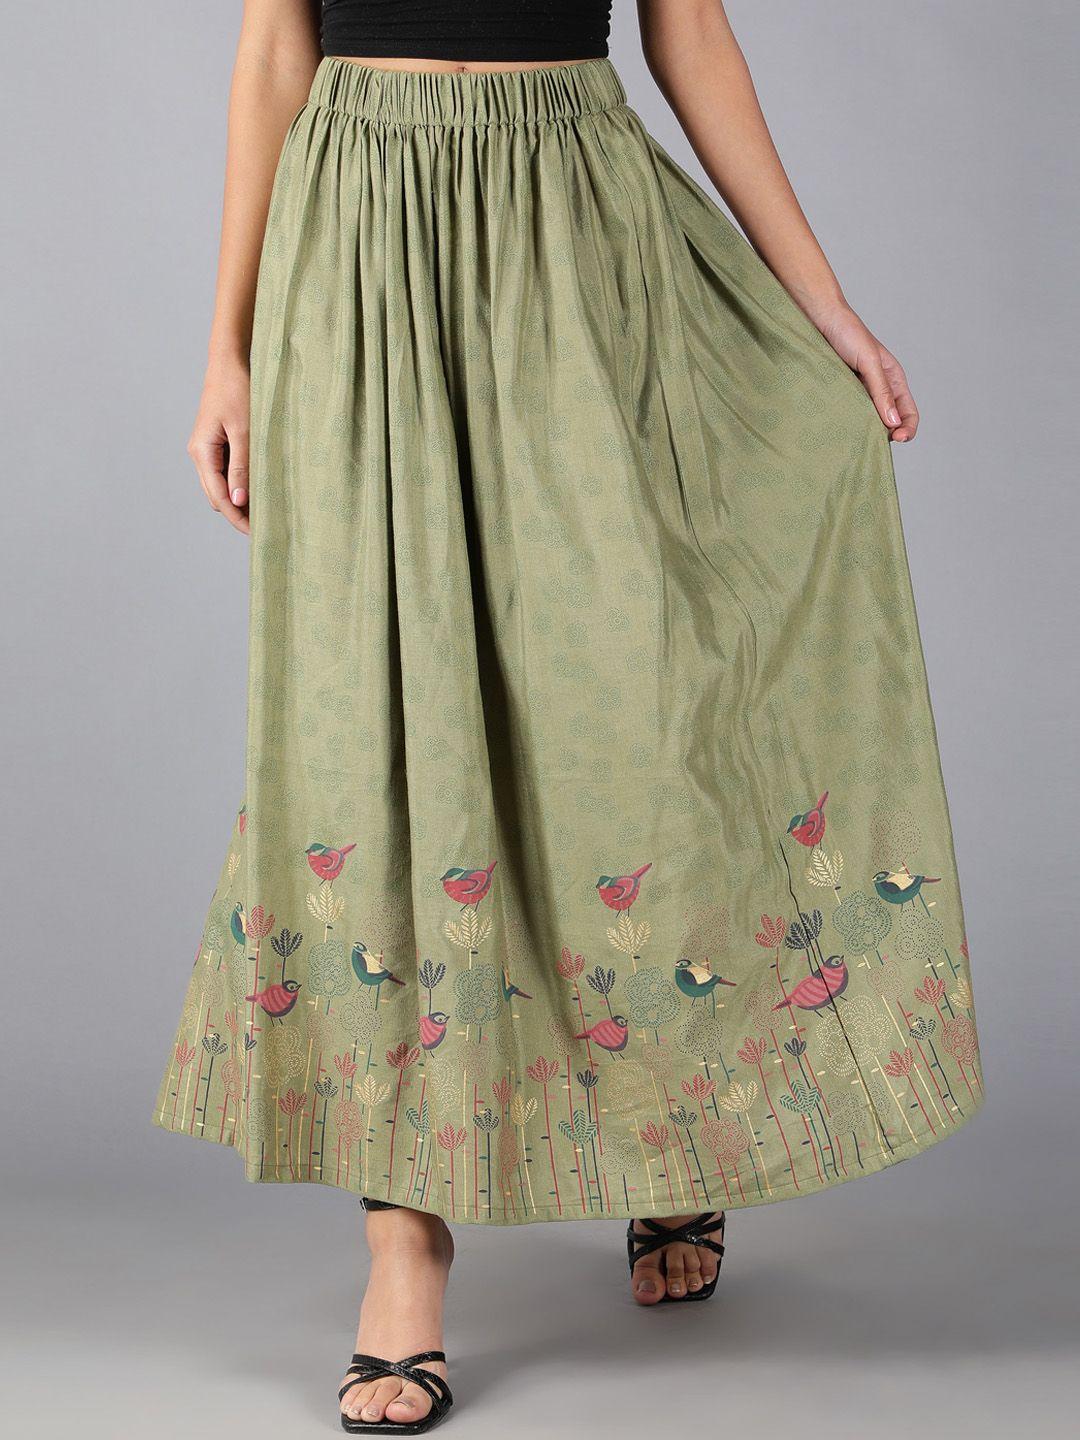 cot'n soft green printed pure cotton maxi skirt